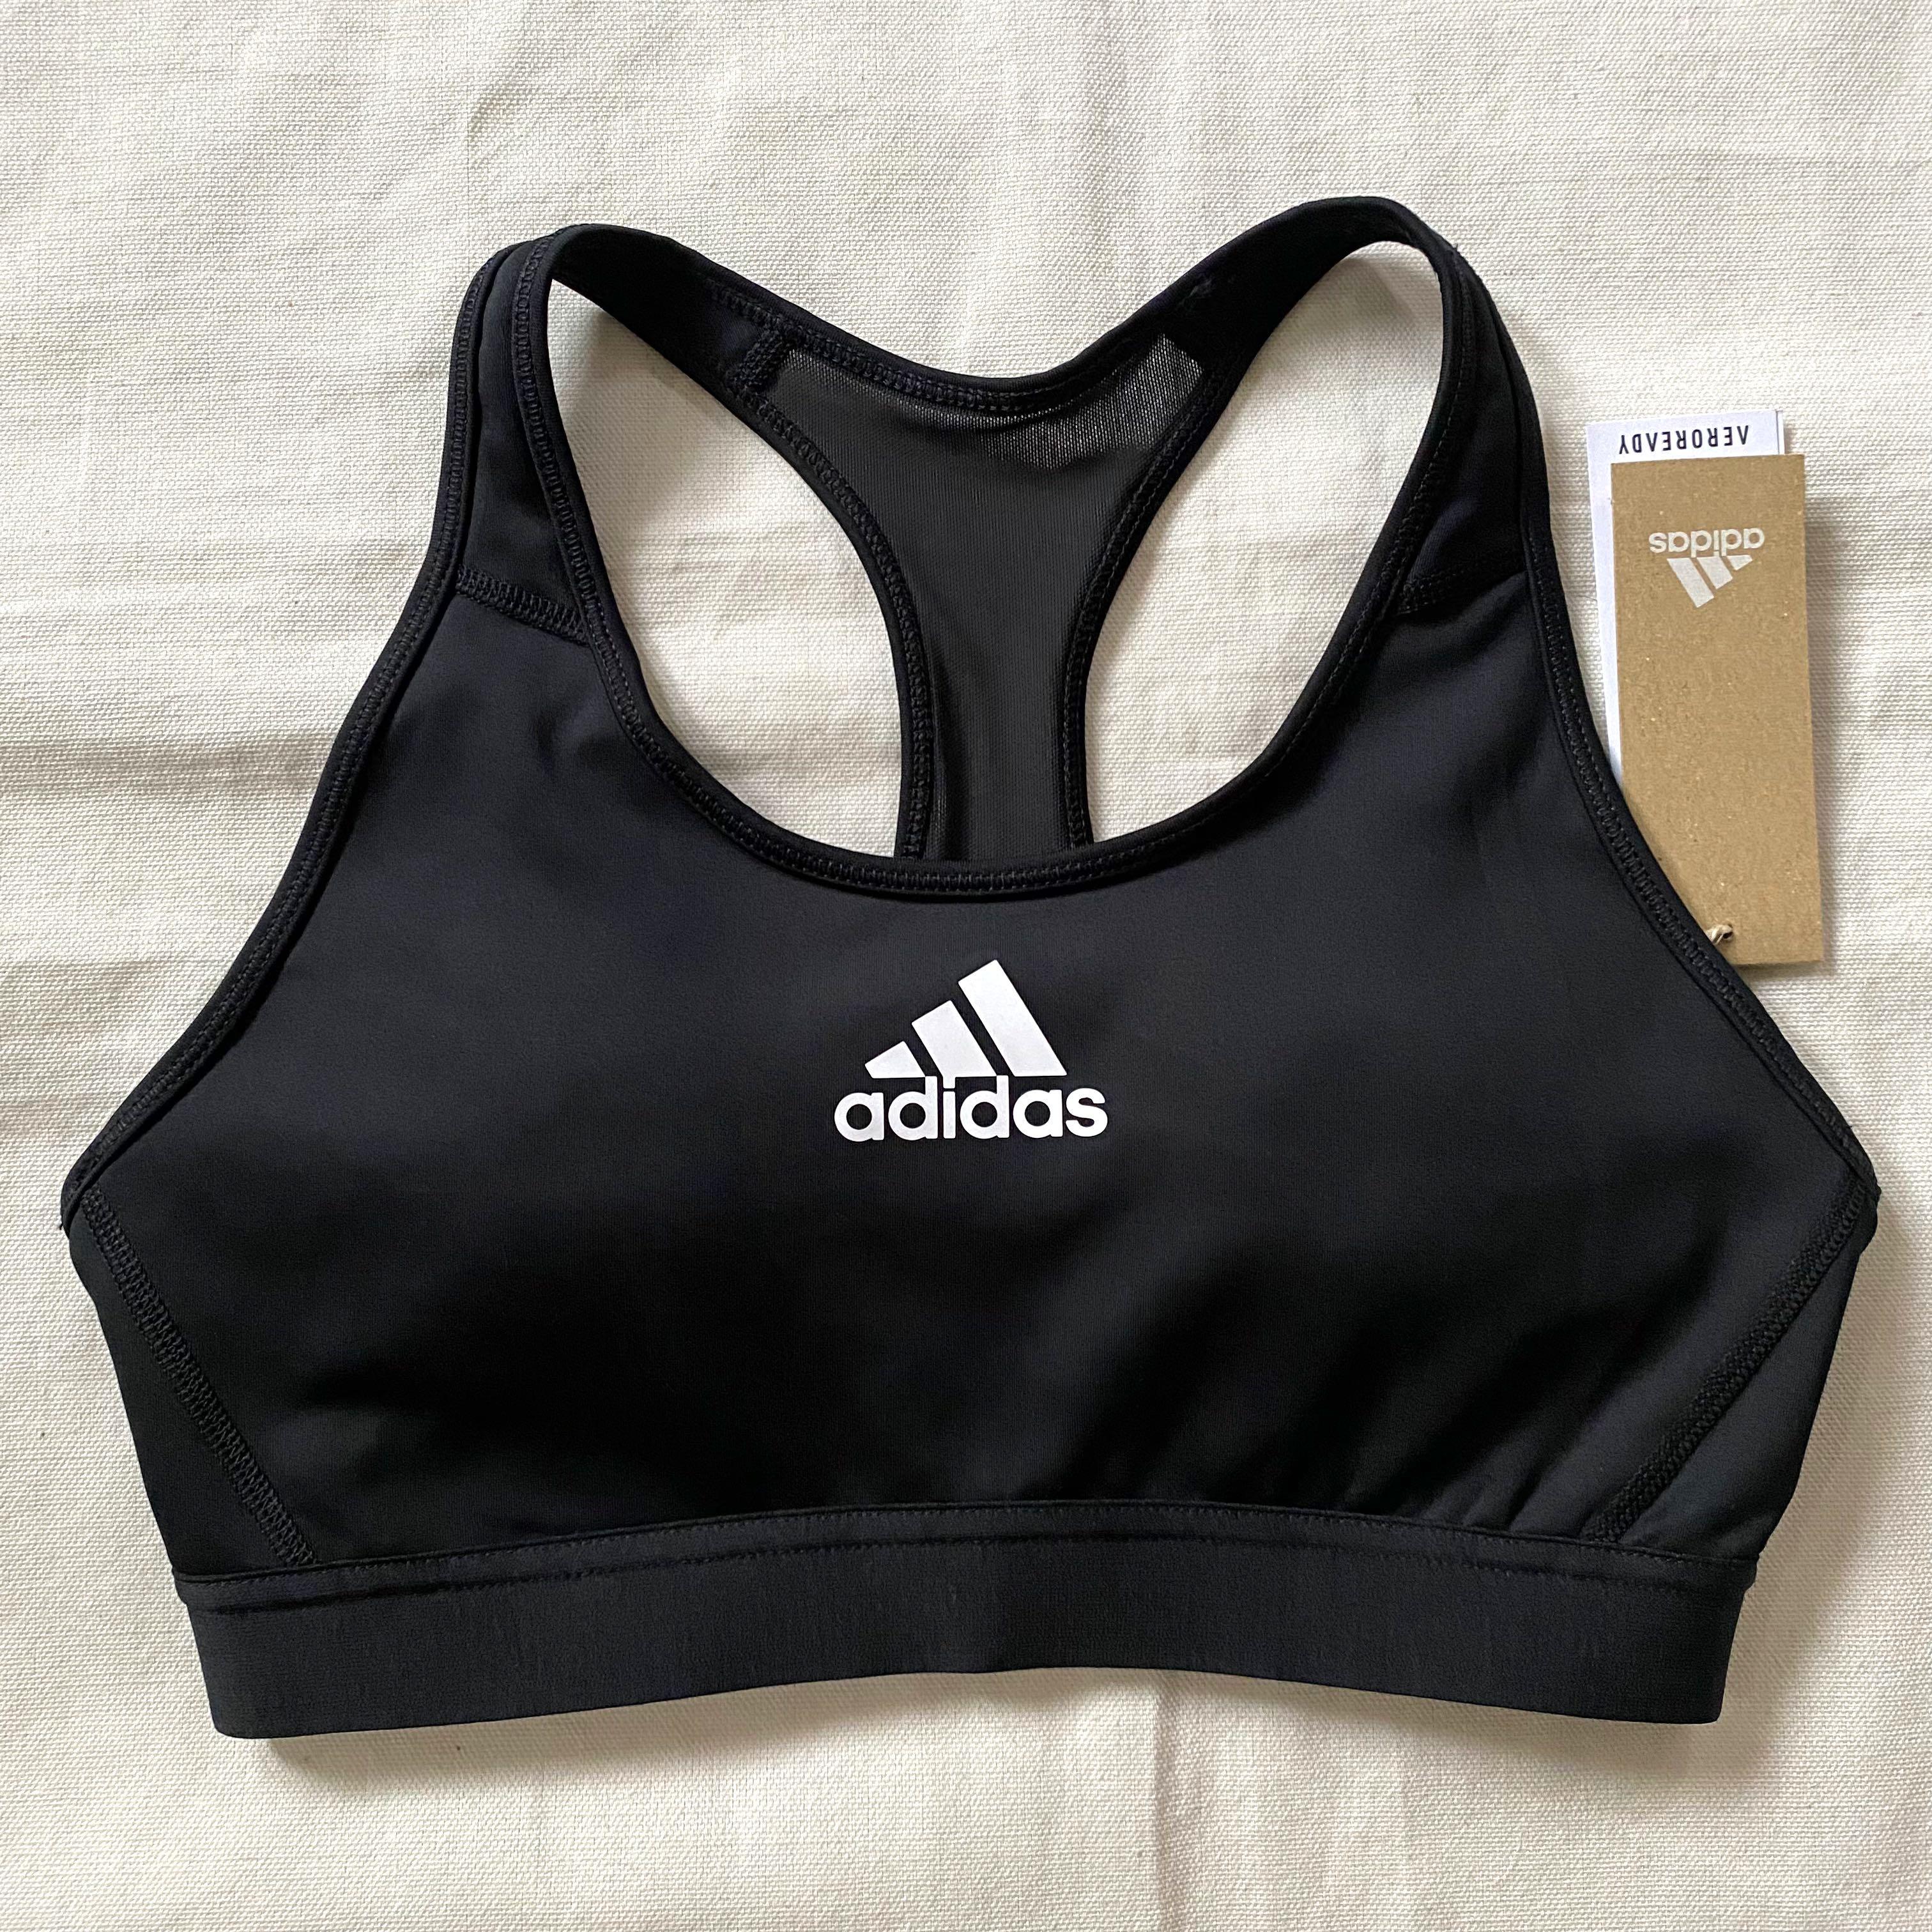 NEW with tags Adidas sports bra, Women's Fashion, Activewear on Carousell